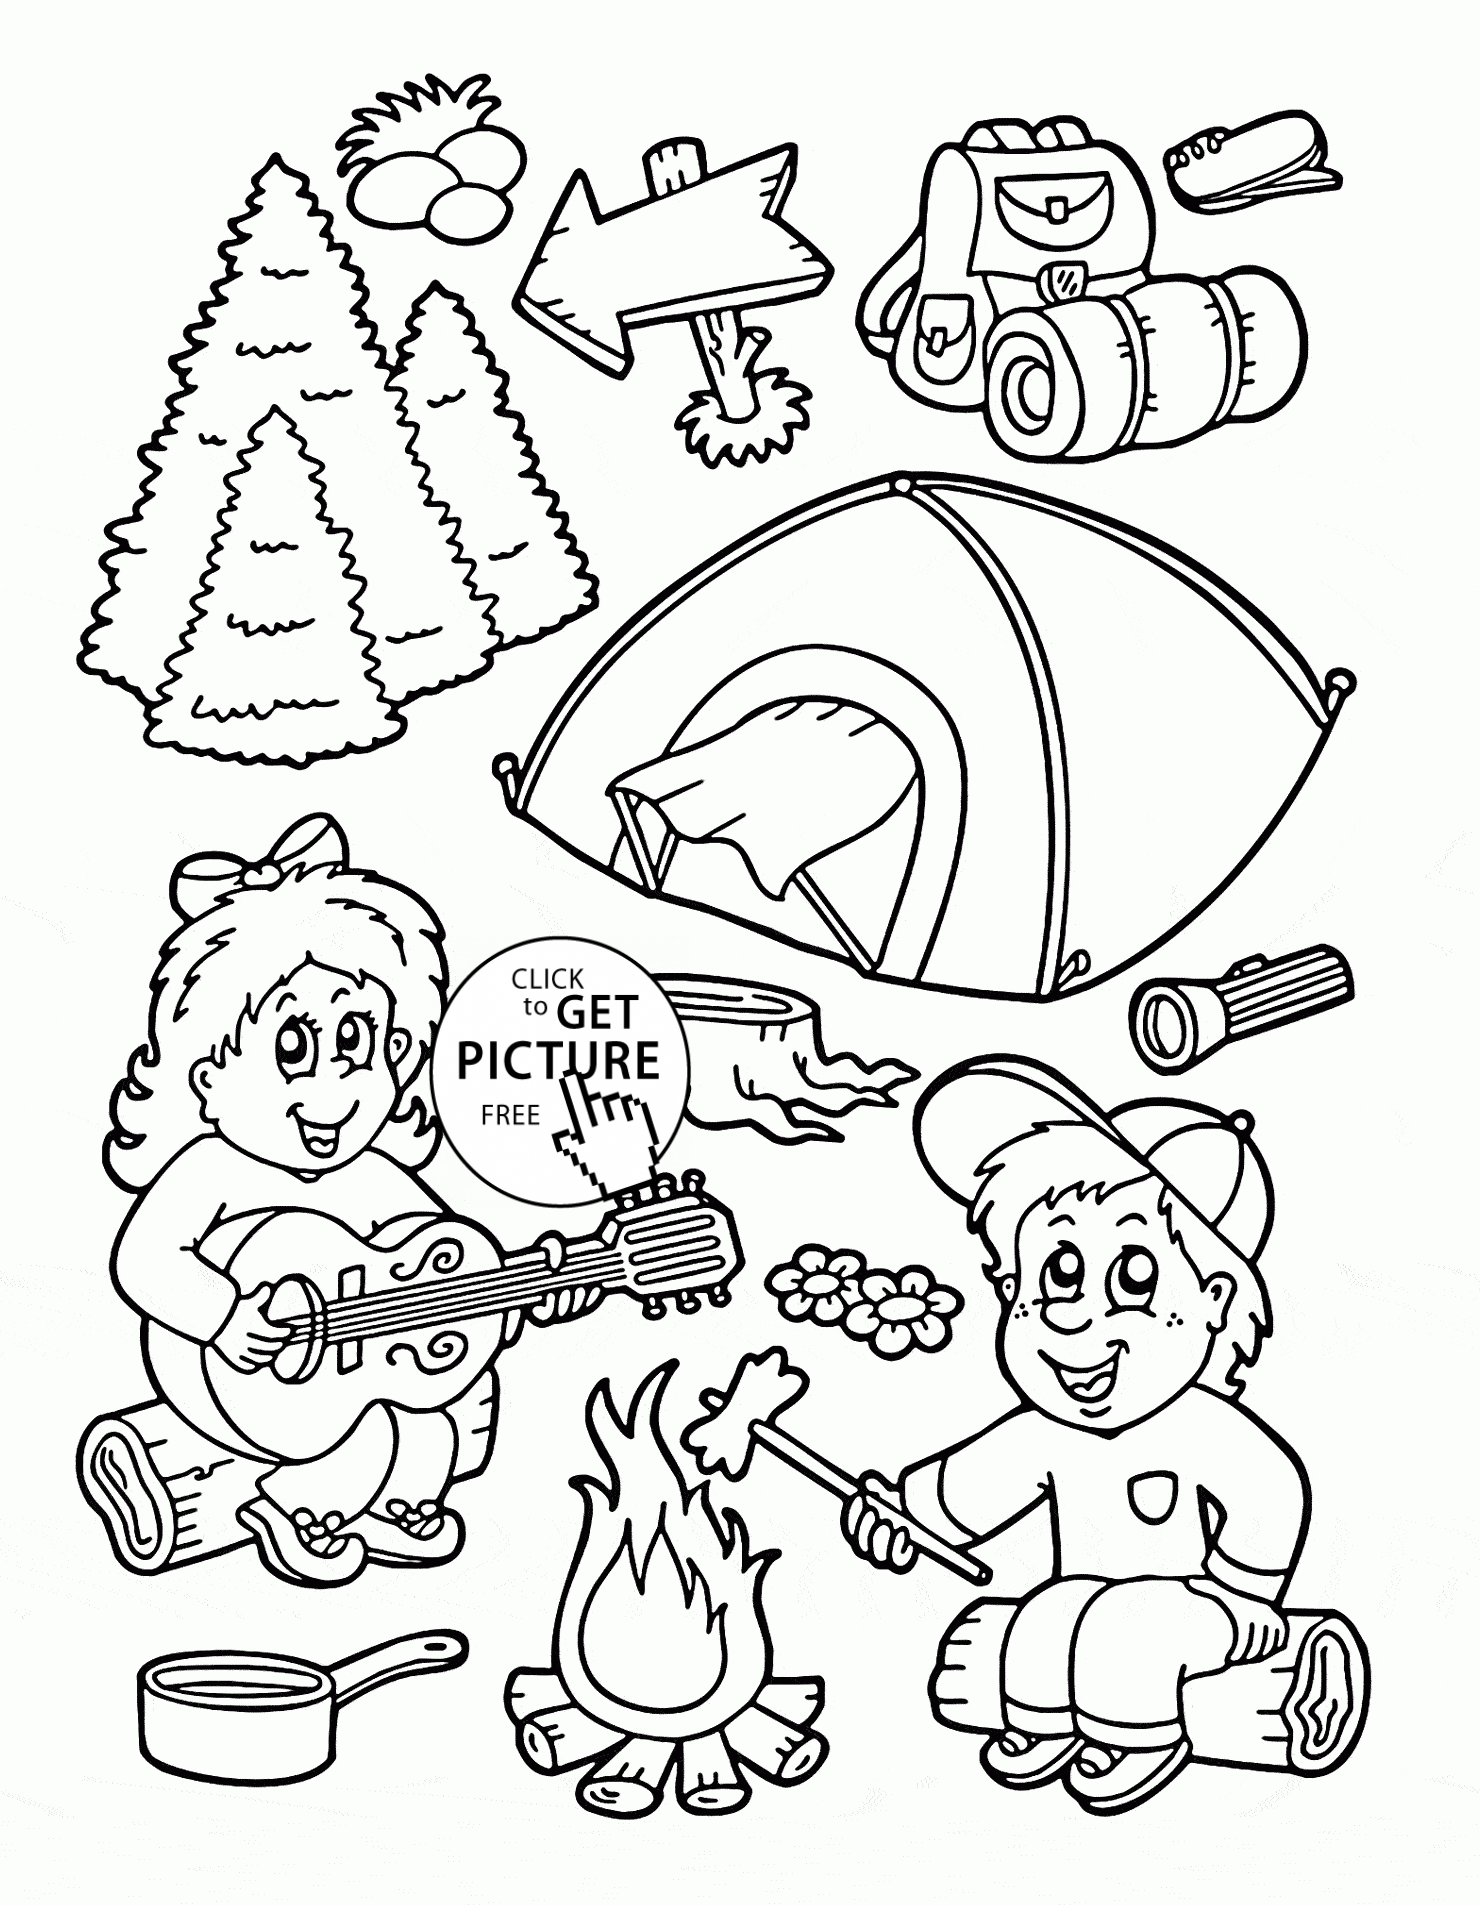 kids-camping-coloring-clip-art-library